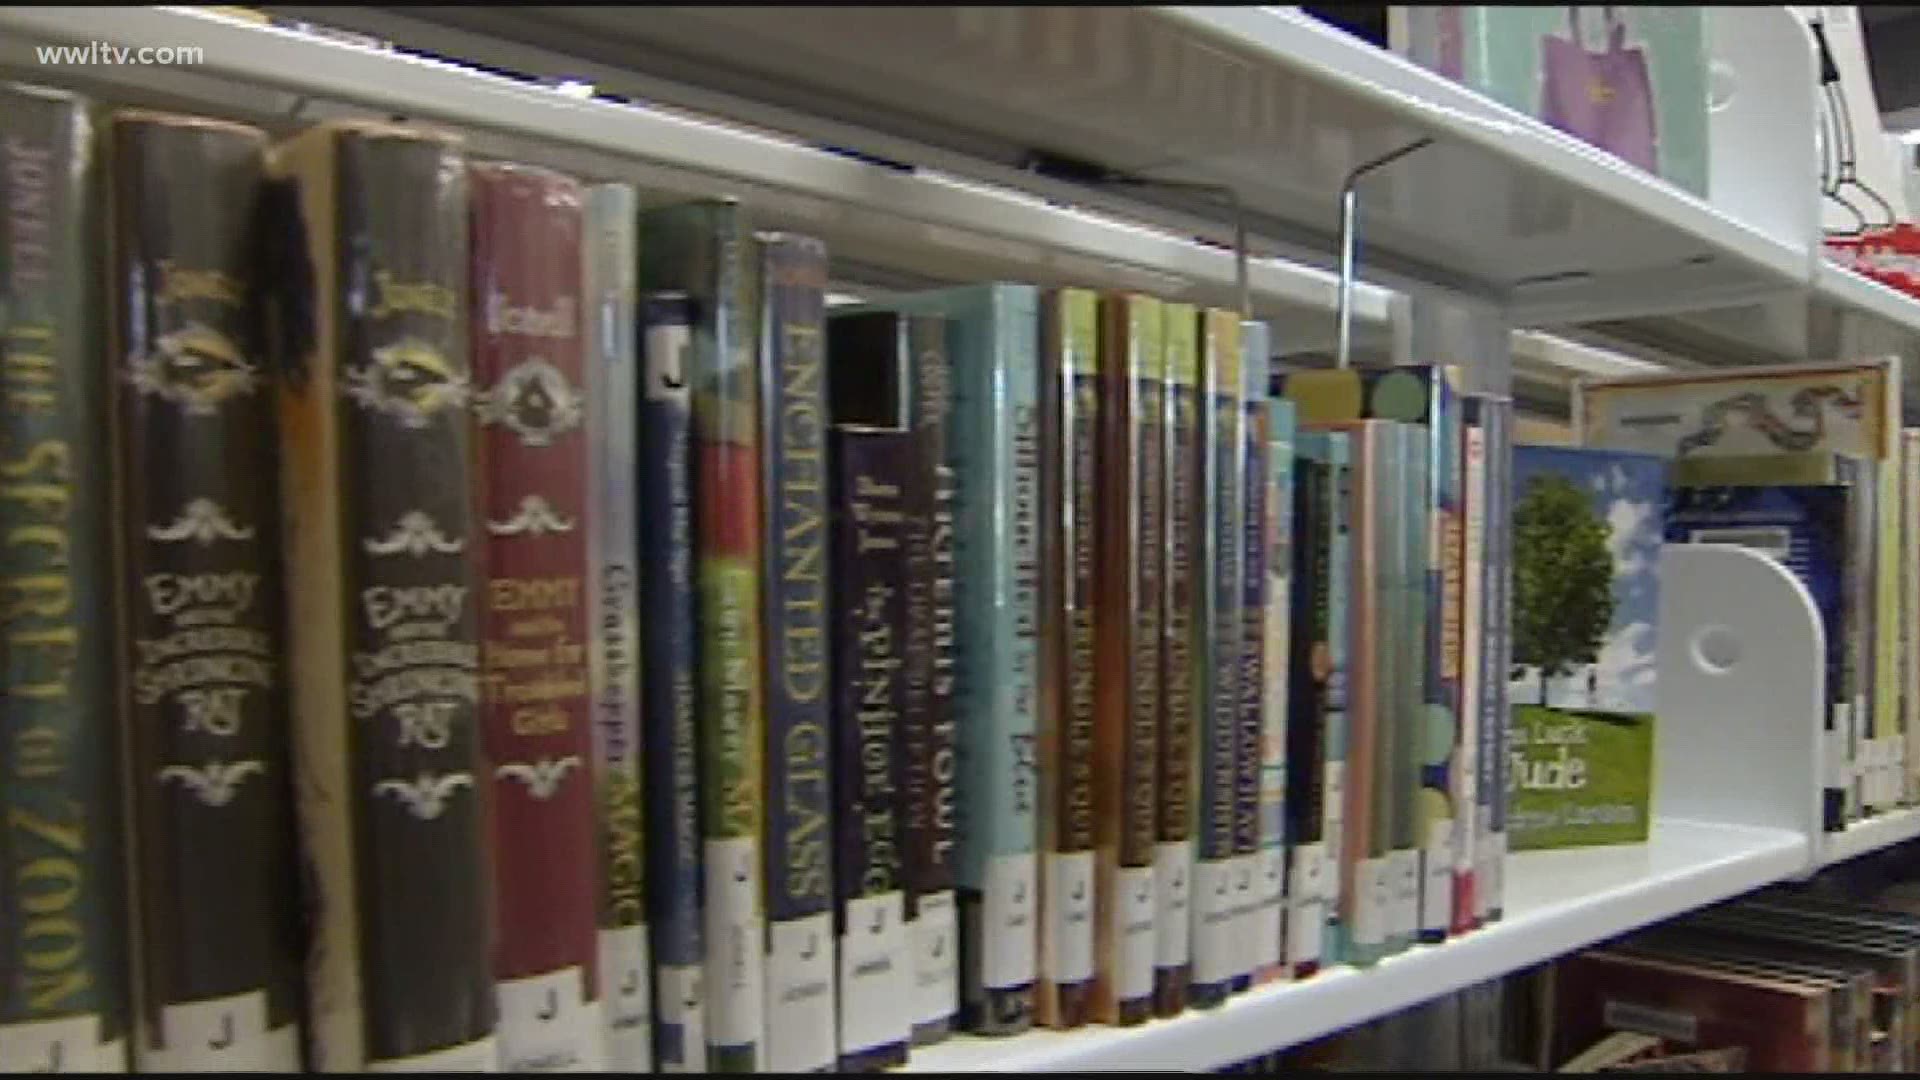 The city of New Orleans needs to make some cuts but library supporters say the libraries are being targeted for unfairly large cuts.